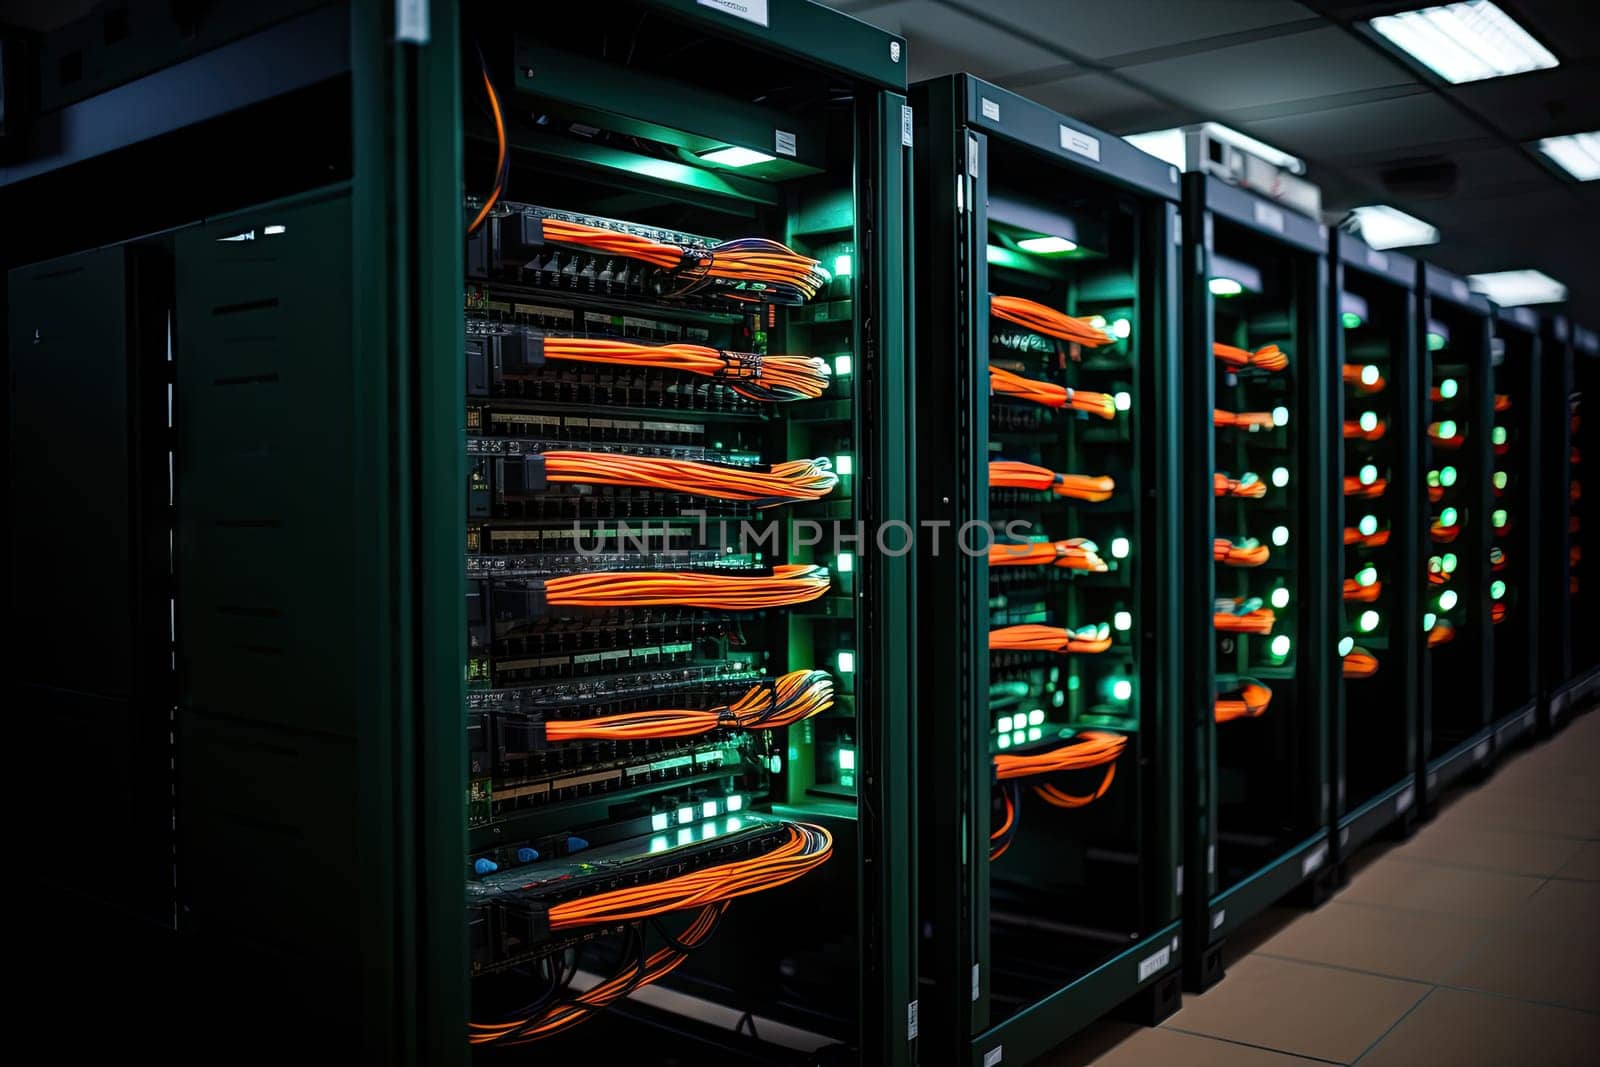 A Towering Array of Servers in a Cutting-Edge Data Center